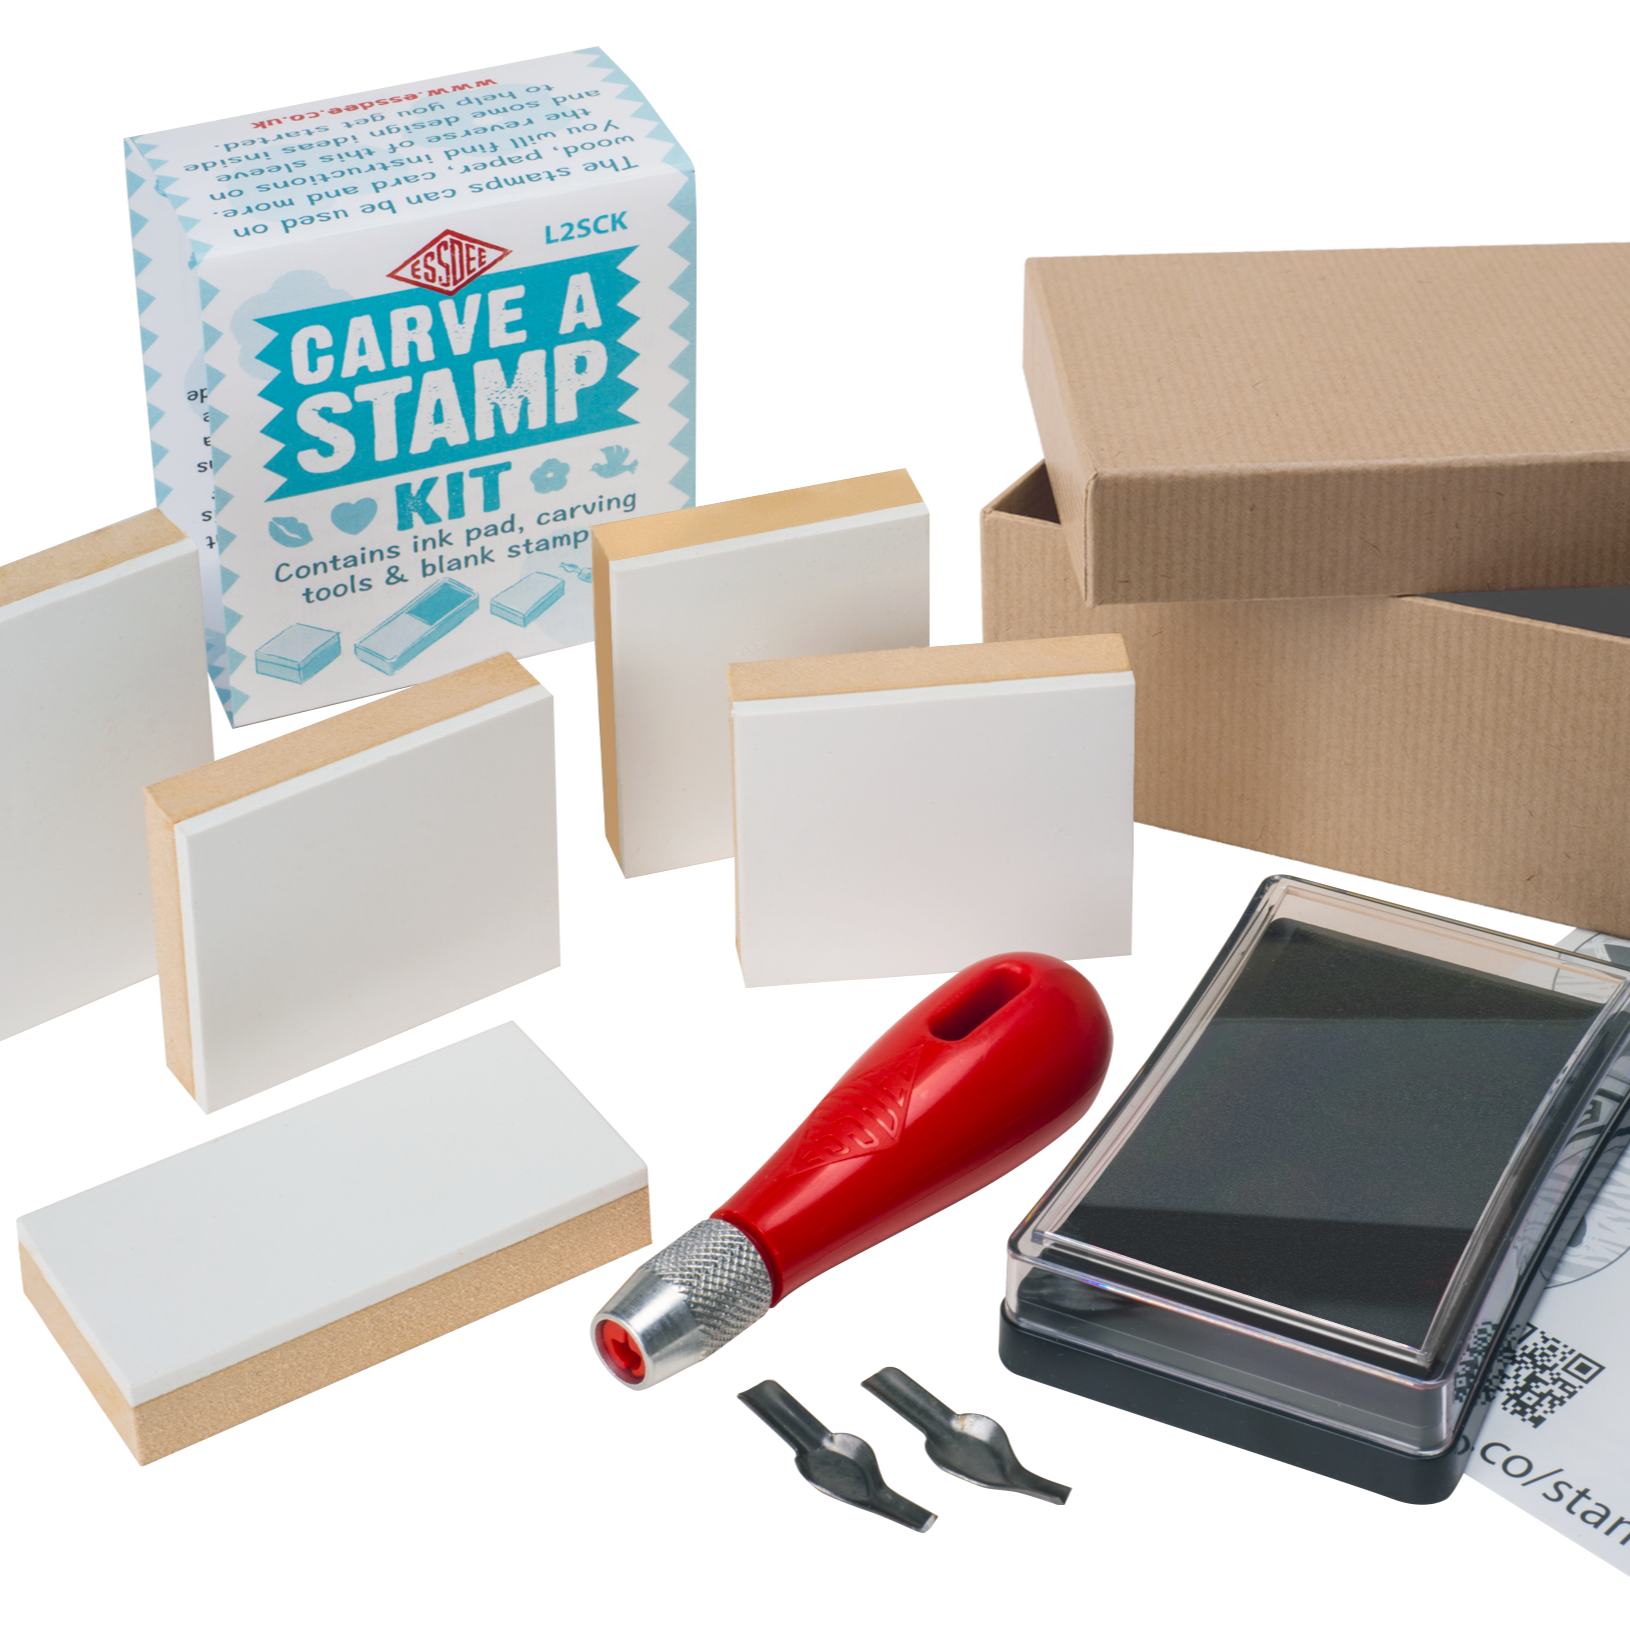 Stamp Carving Kit for making your own stamps